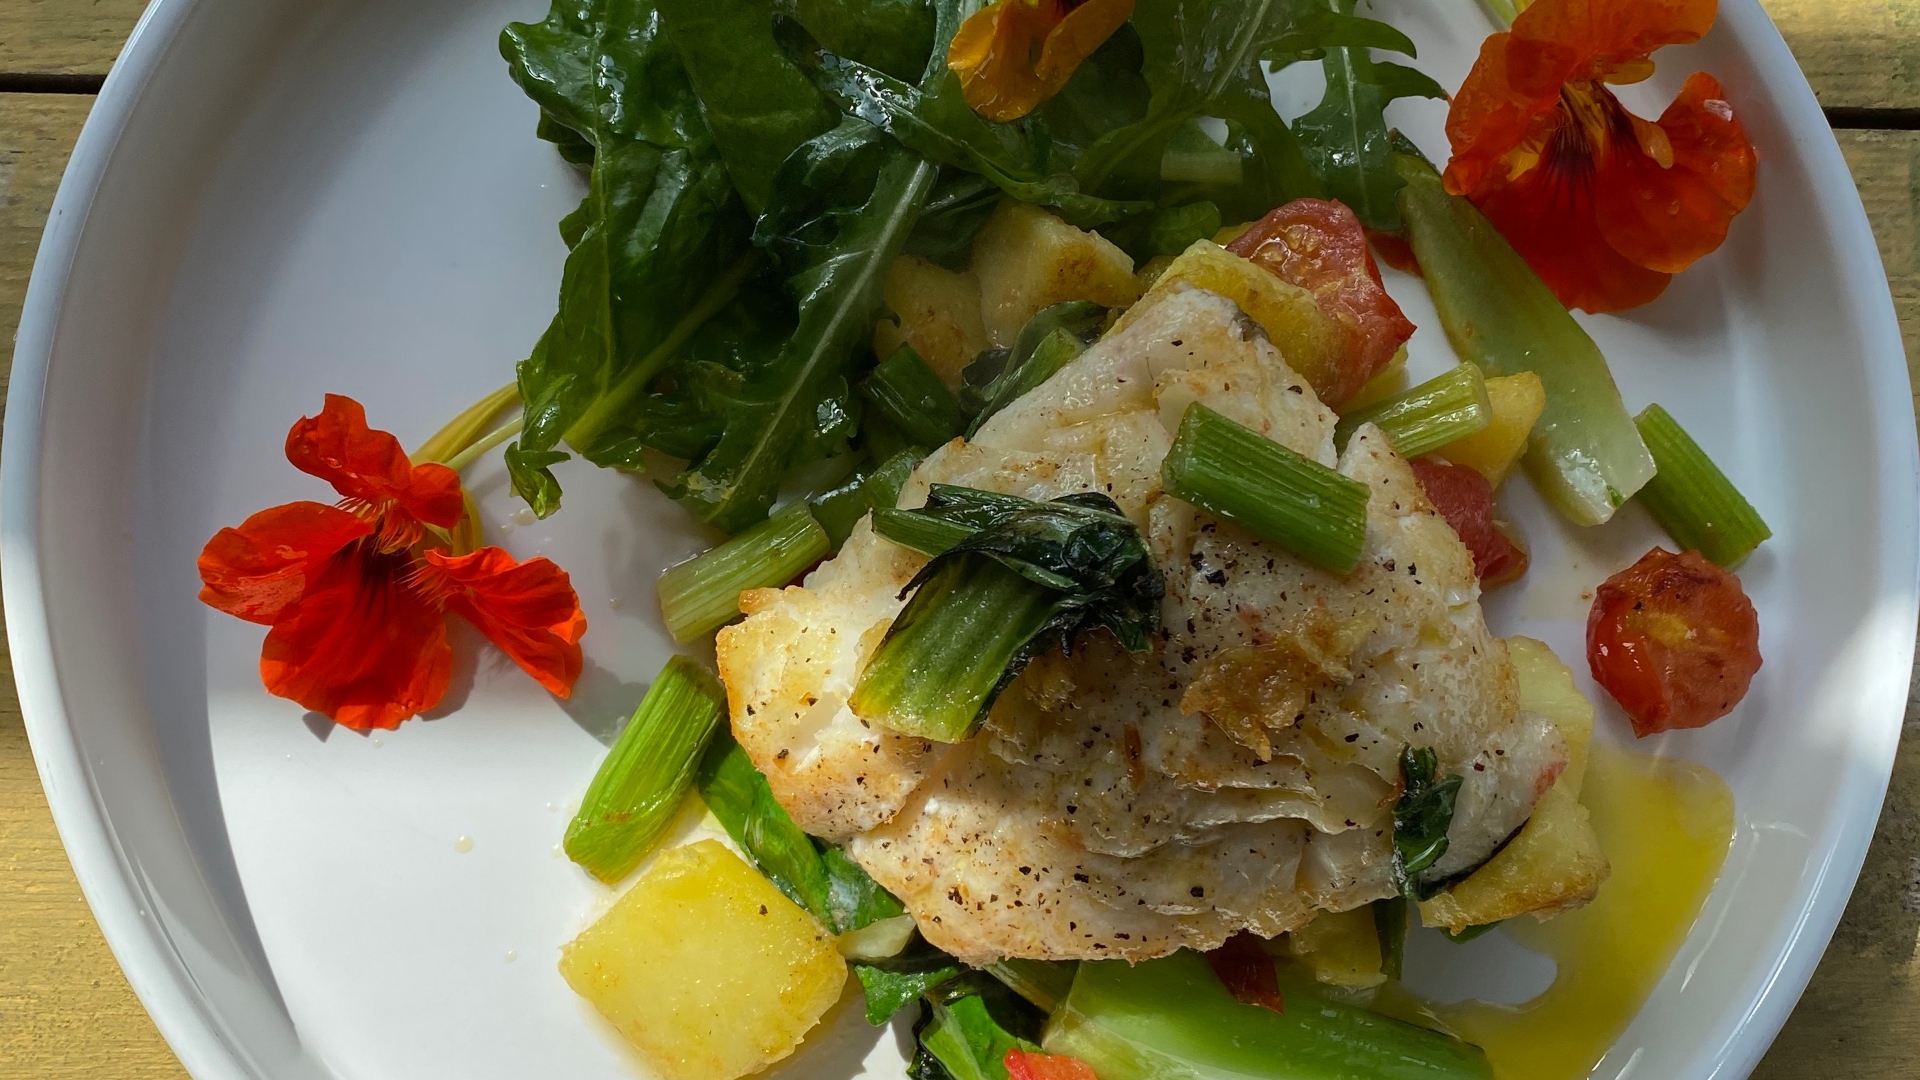 Summer pan seared cod and vegetables